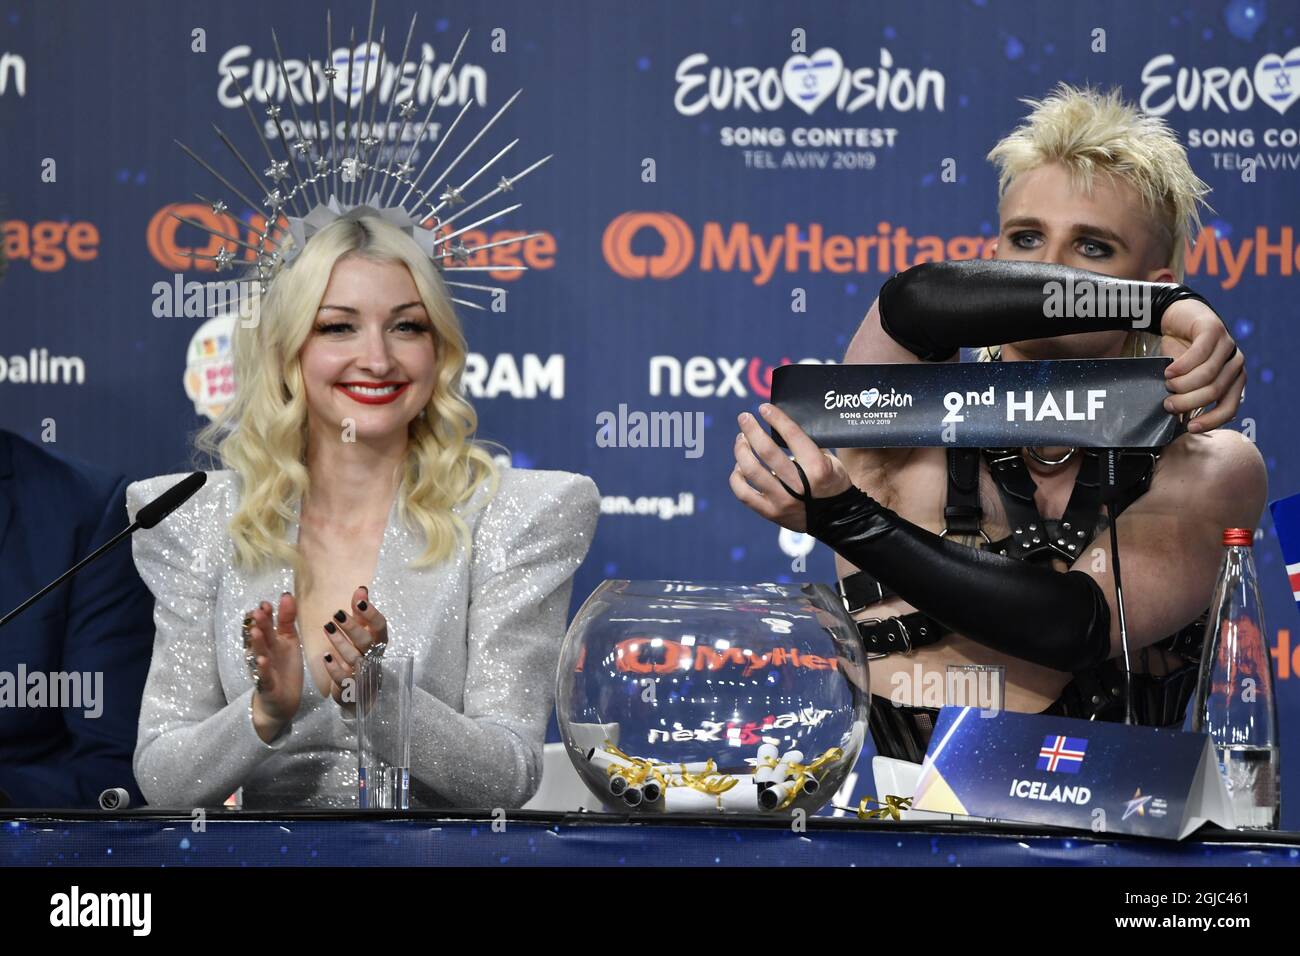 Kate Miller-Heidke of Australia and Hatari from Iceland during a press  conference in the Eurovision Song Contest 2019 in Tel Aviv, Israel, May 13,  2019 Foto: Henrik Montgomery / TT kod 10066 Stock Photo - Alamy